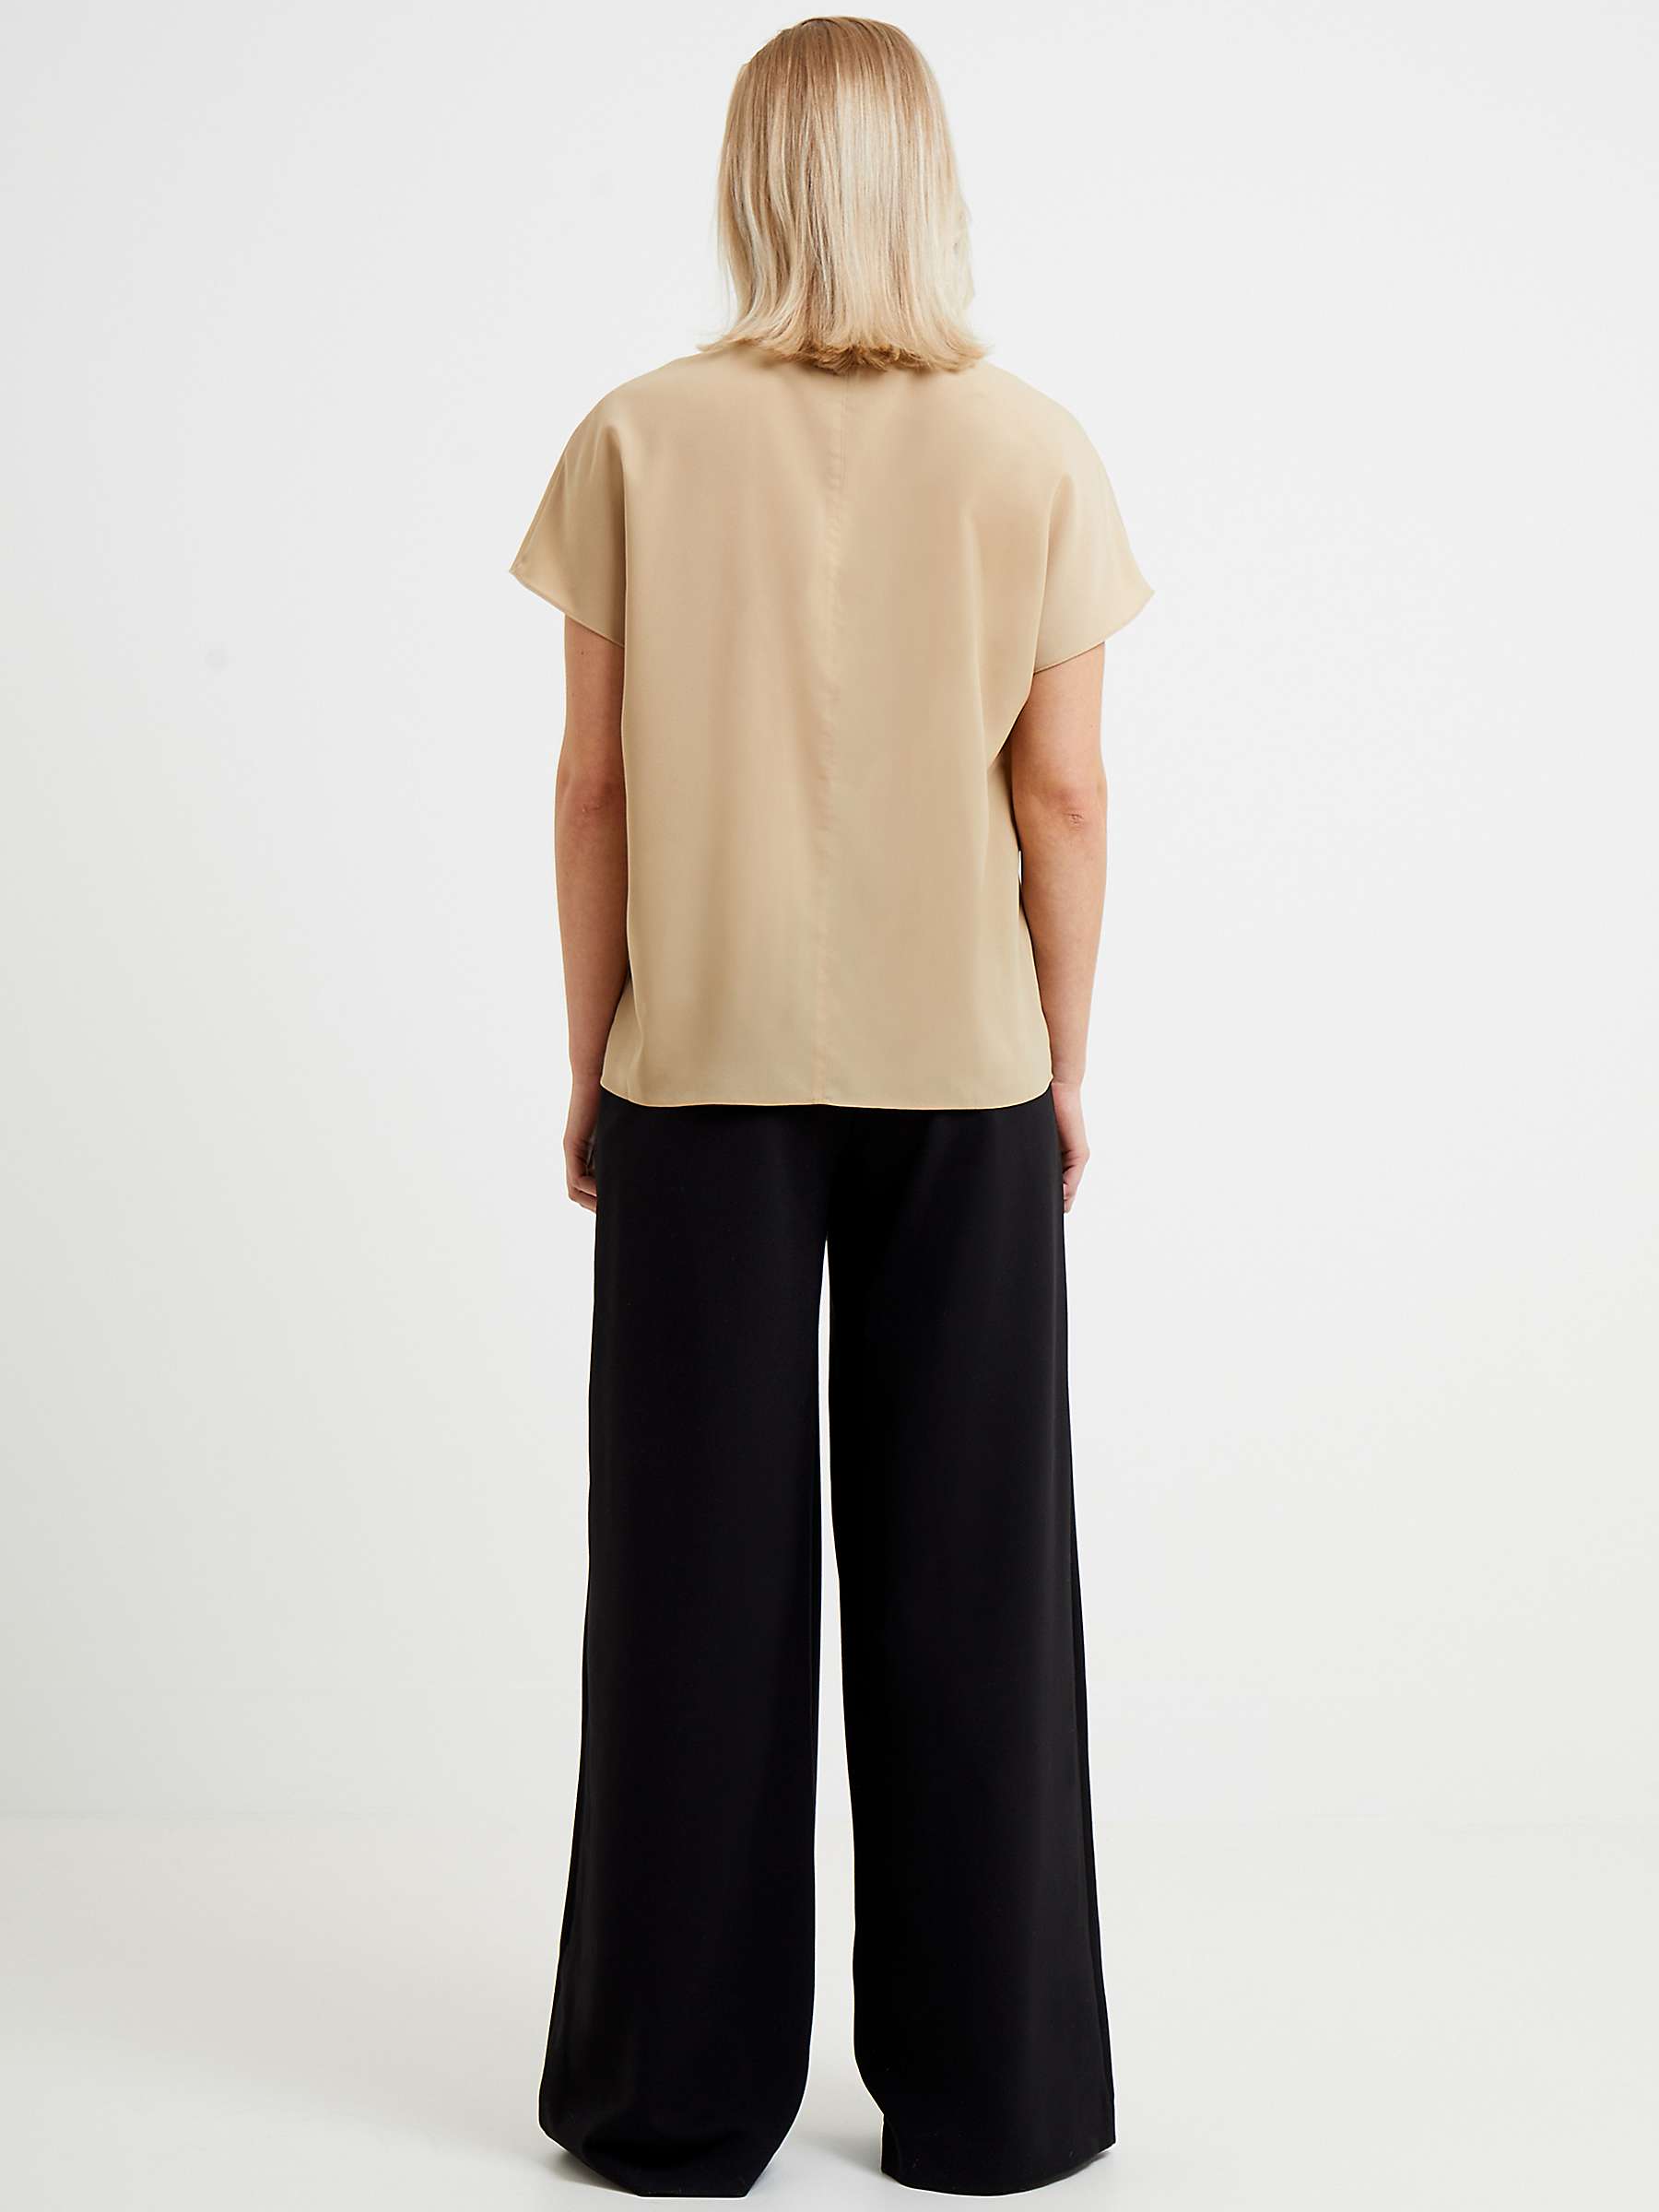 Buy French Connection Crepe Light Crew Neck Top Online at johnlewis.com